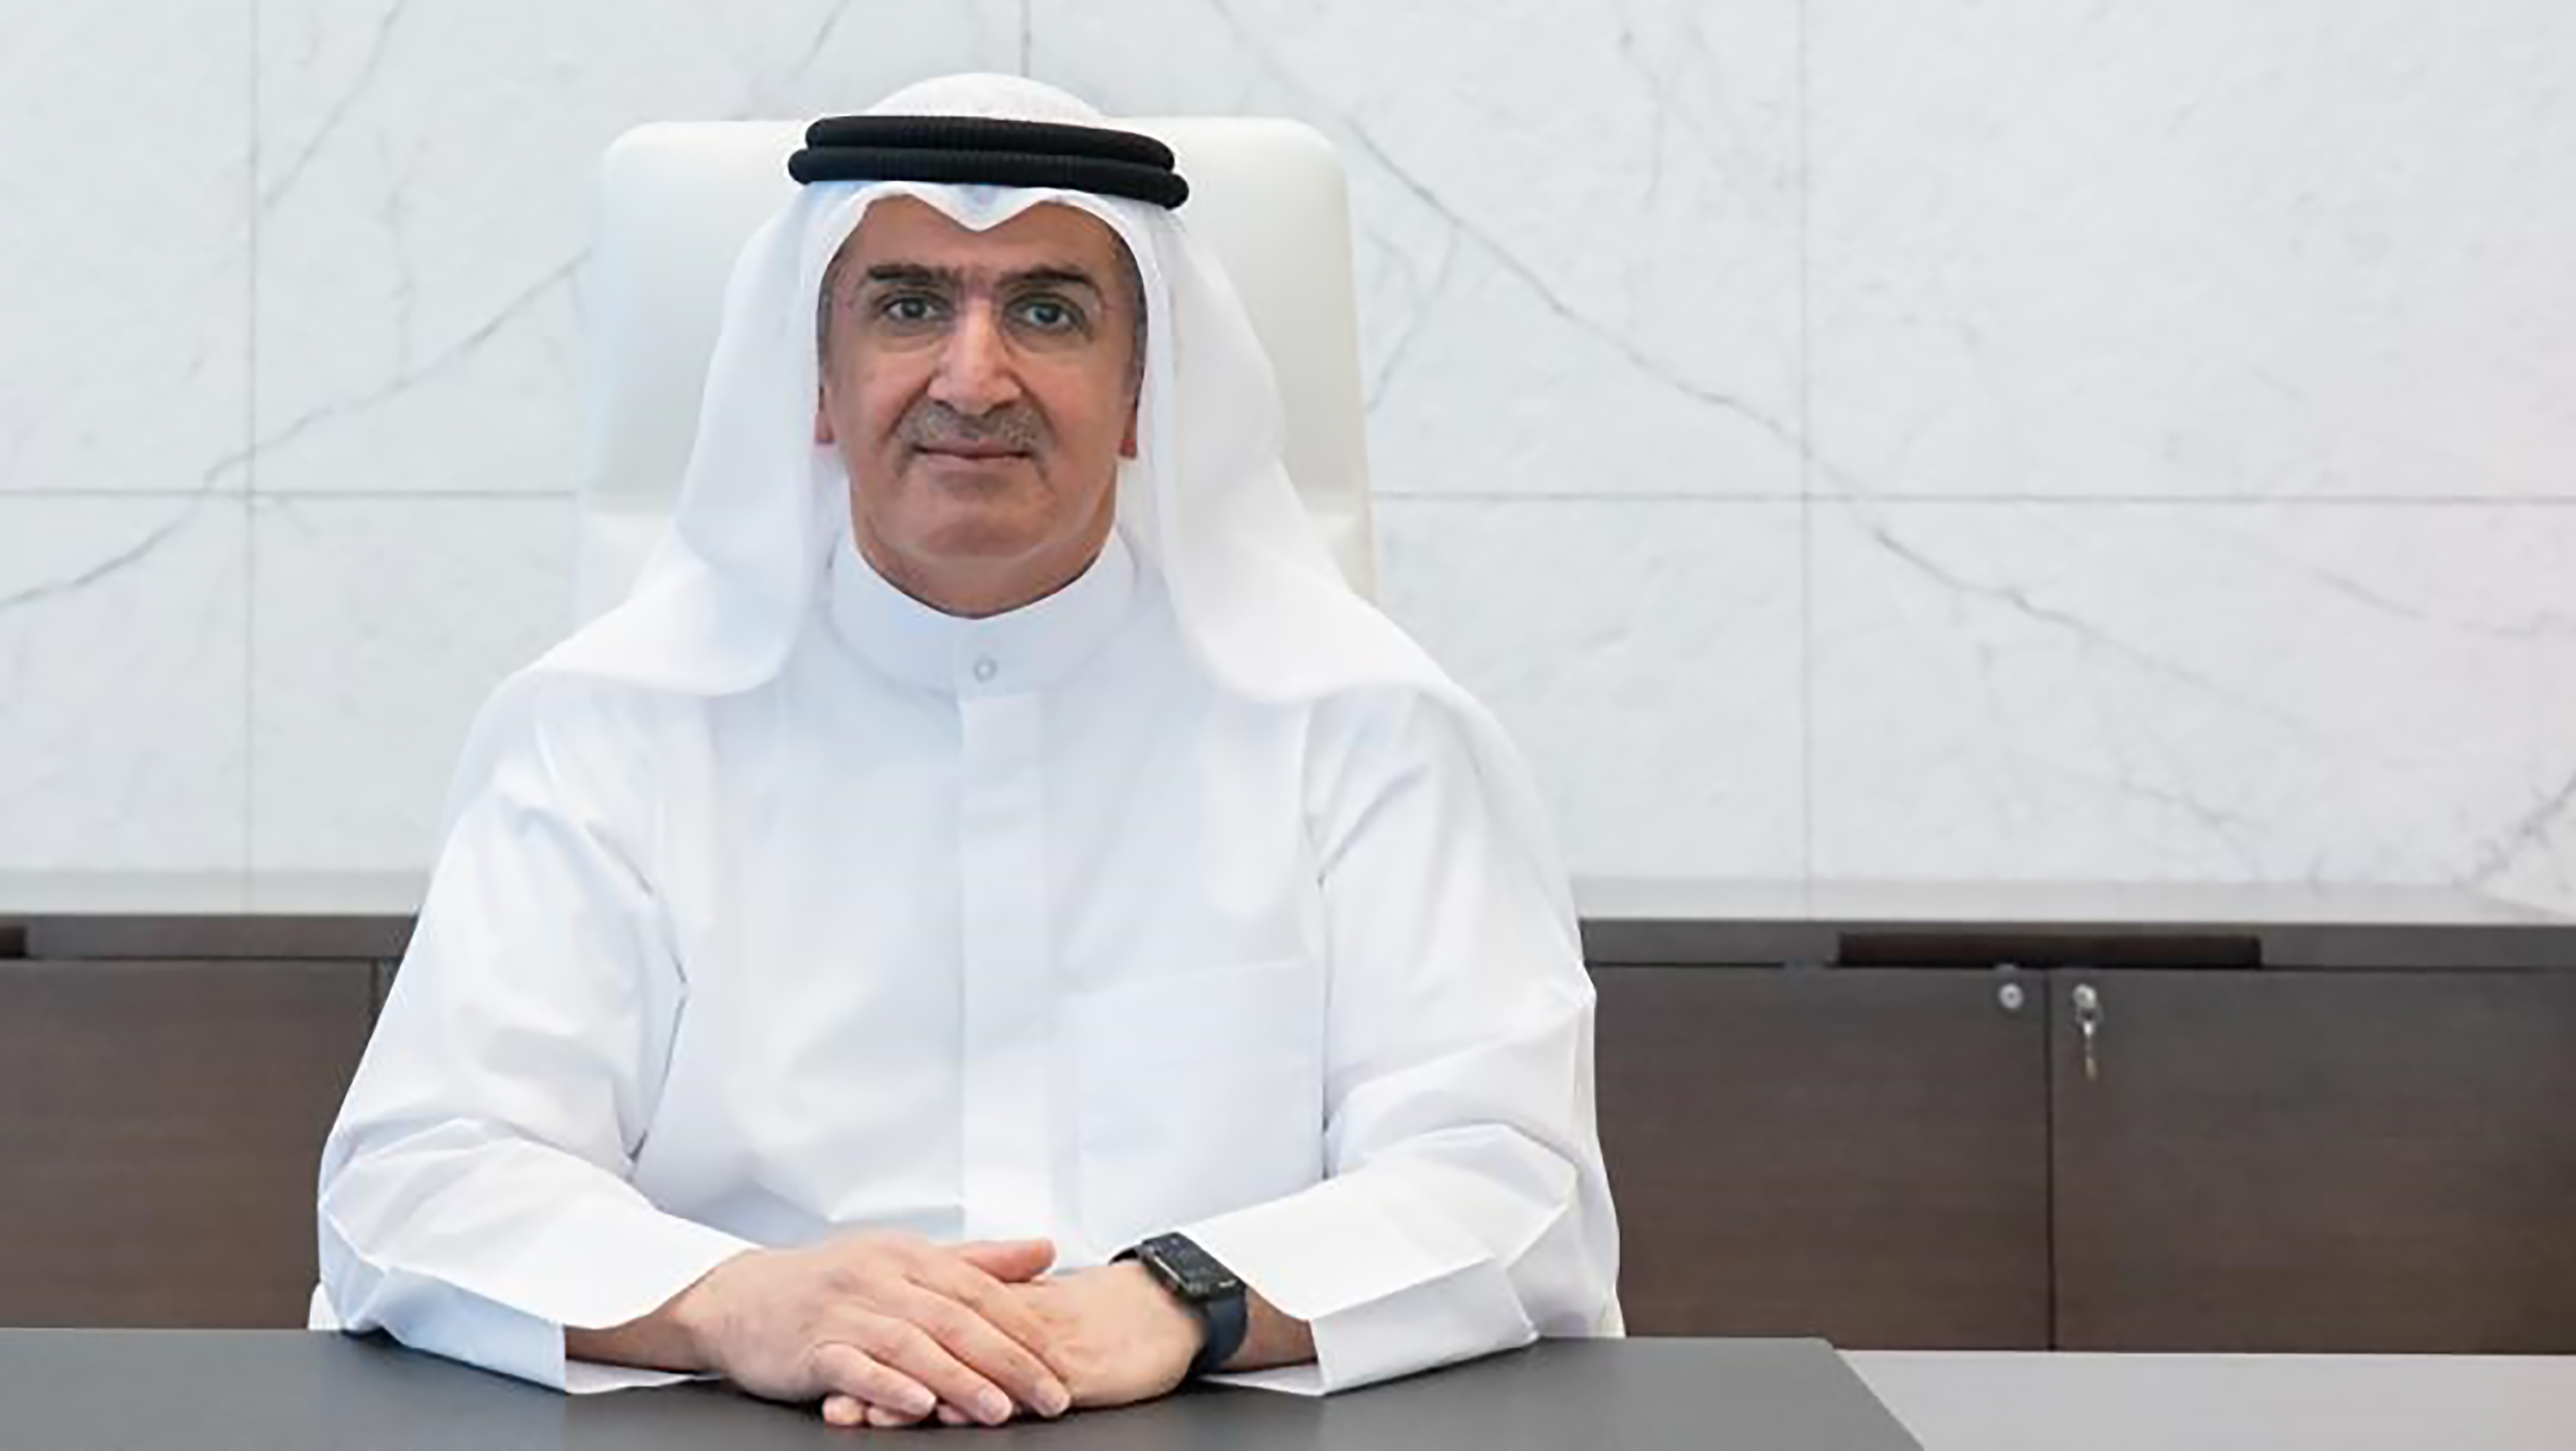 Basel A. Al-Haroon, governor of the Central Bank of Kuwait